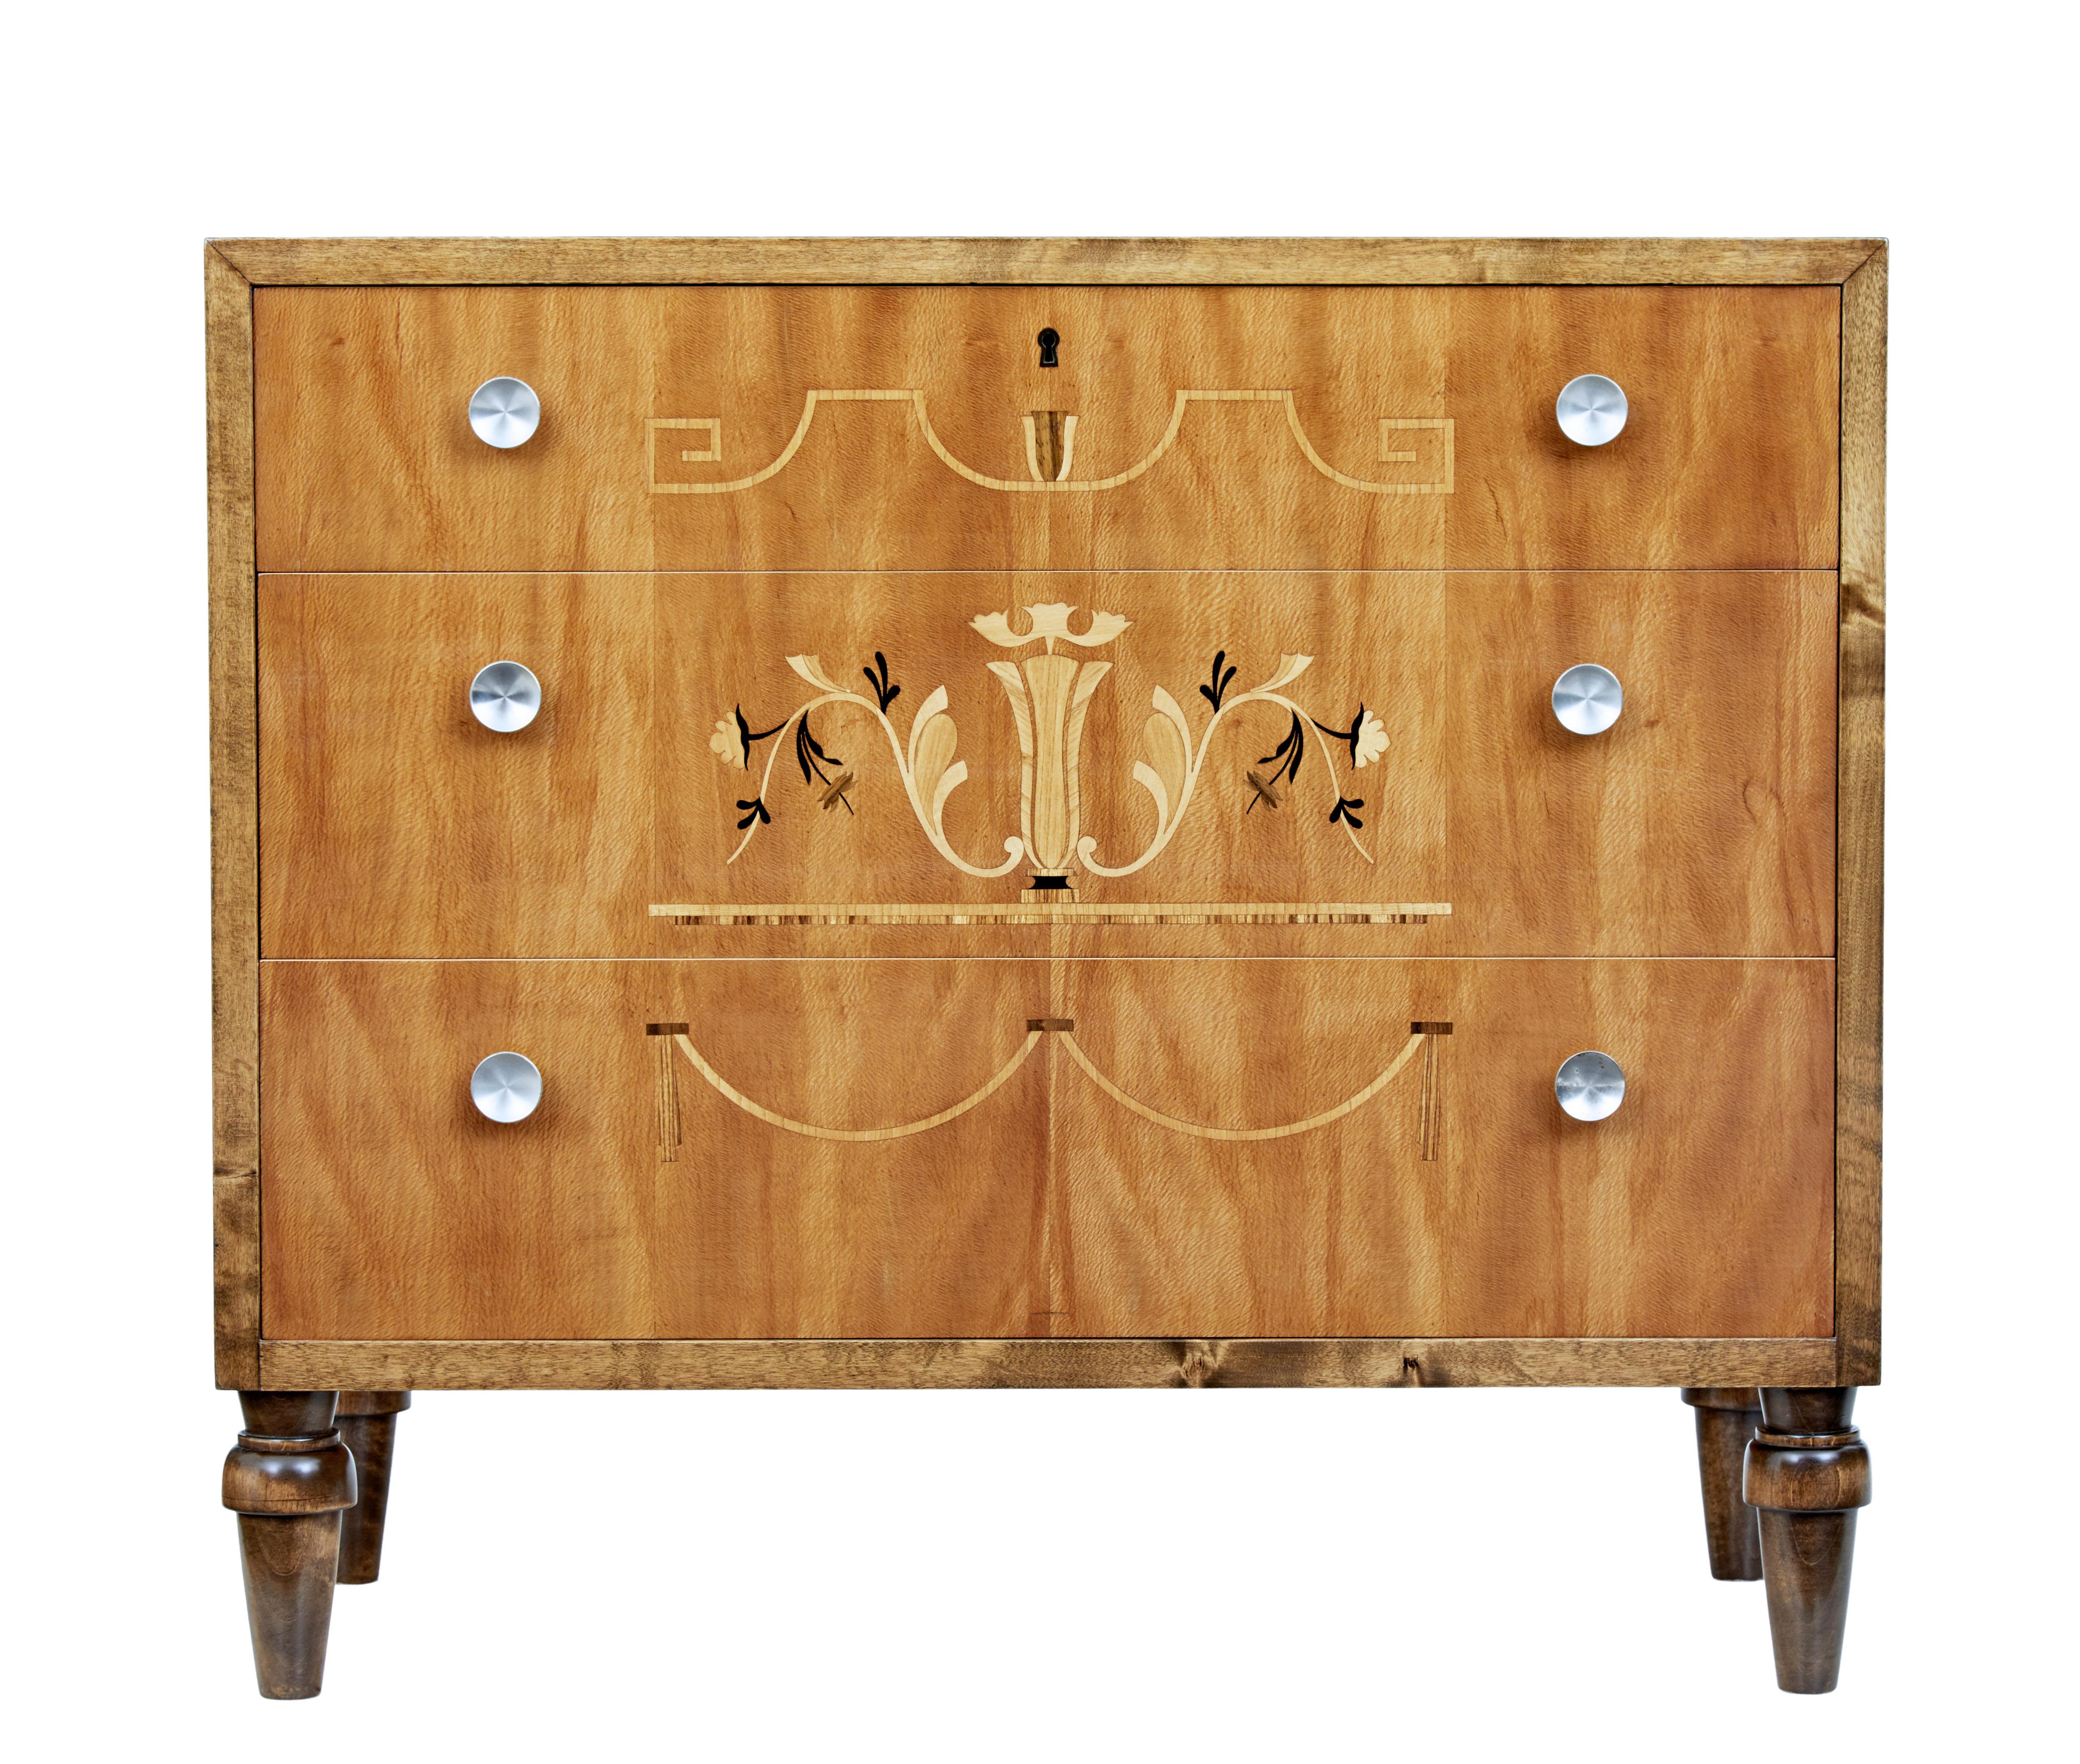 Art Deco Scandinavian birch inlaid chest of drawers, circa 1930.

Elegant Art Deco period chest of drawers. 3 graduating drawers each embellished with classical inlaid designs and fitted with brushed steel handles.

Outer birch carcass stained